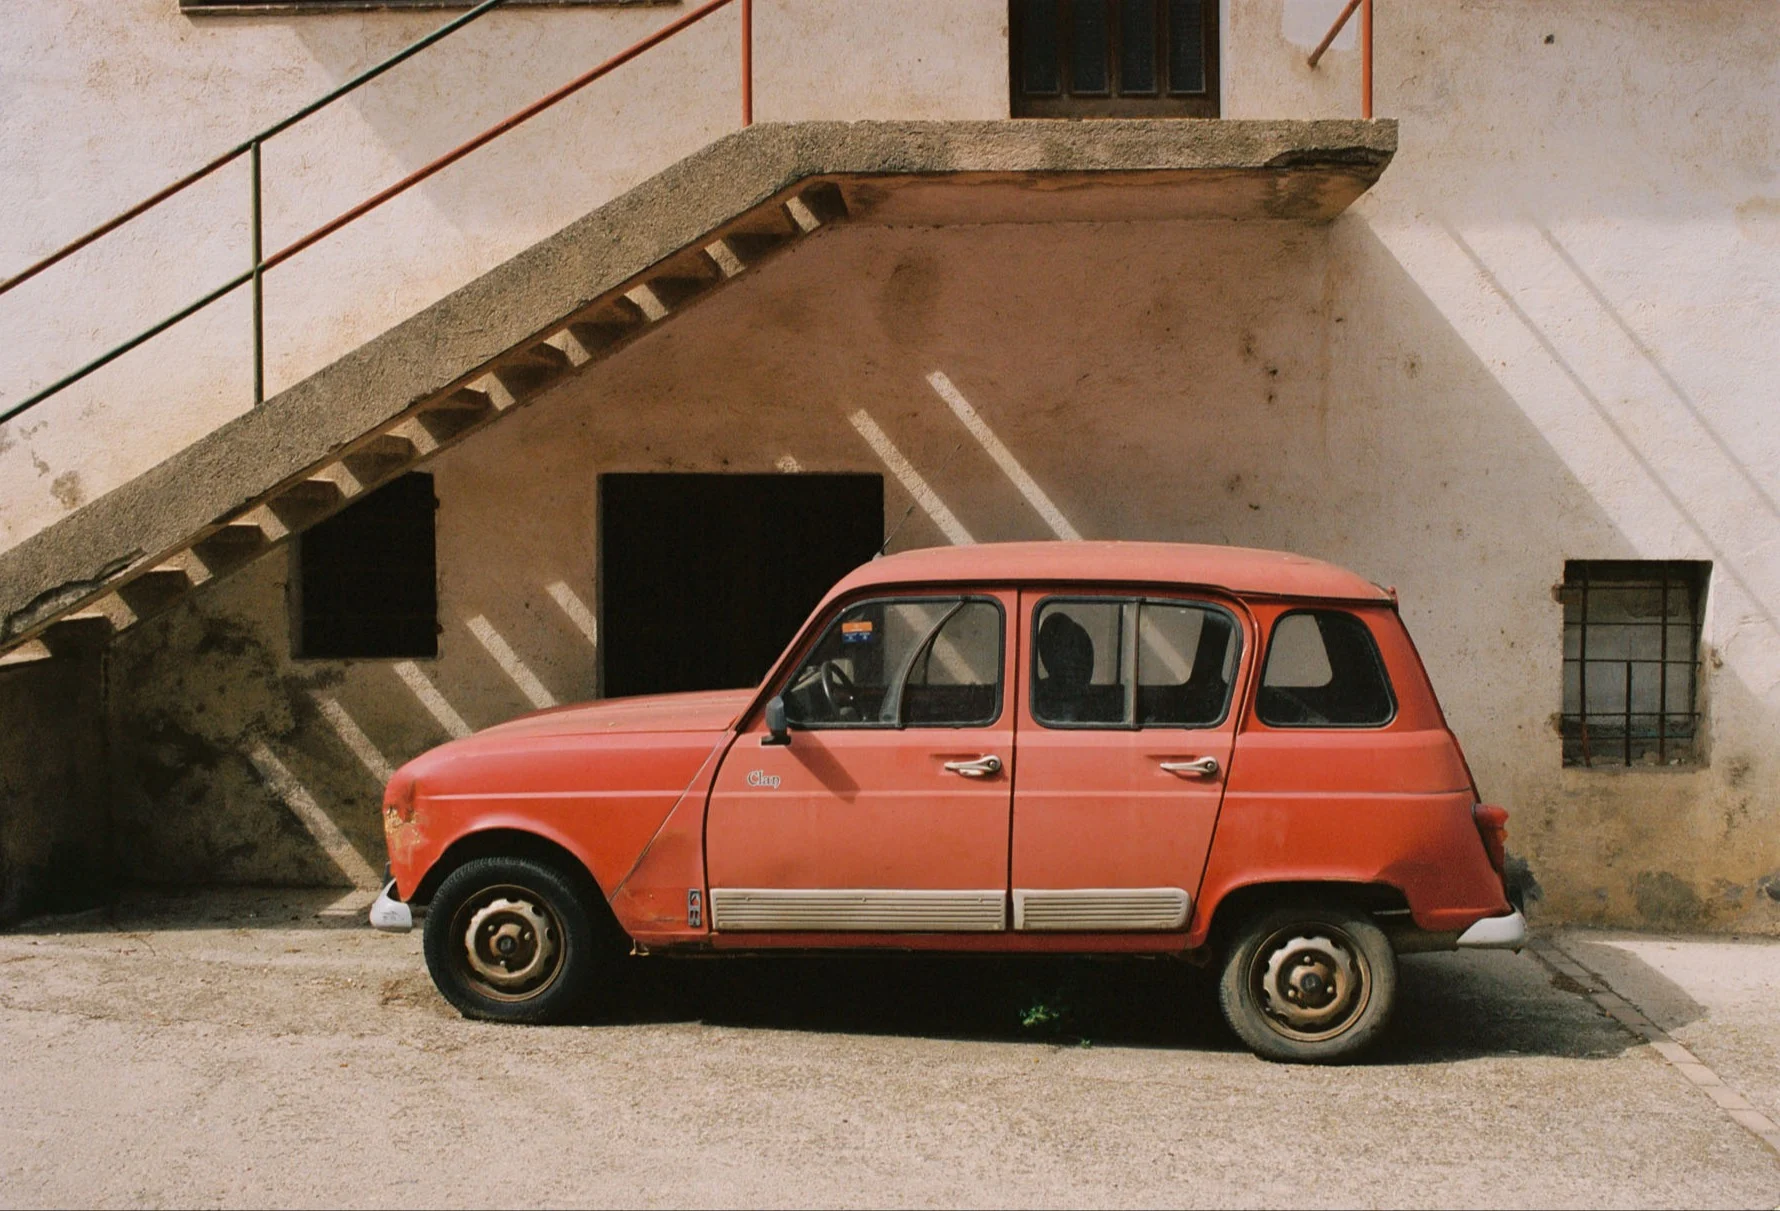 A photograph of a small and old red car parked below an old house.